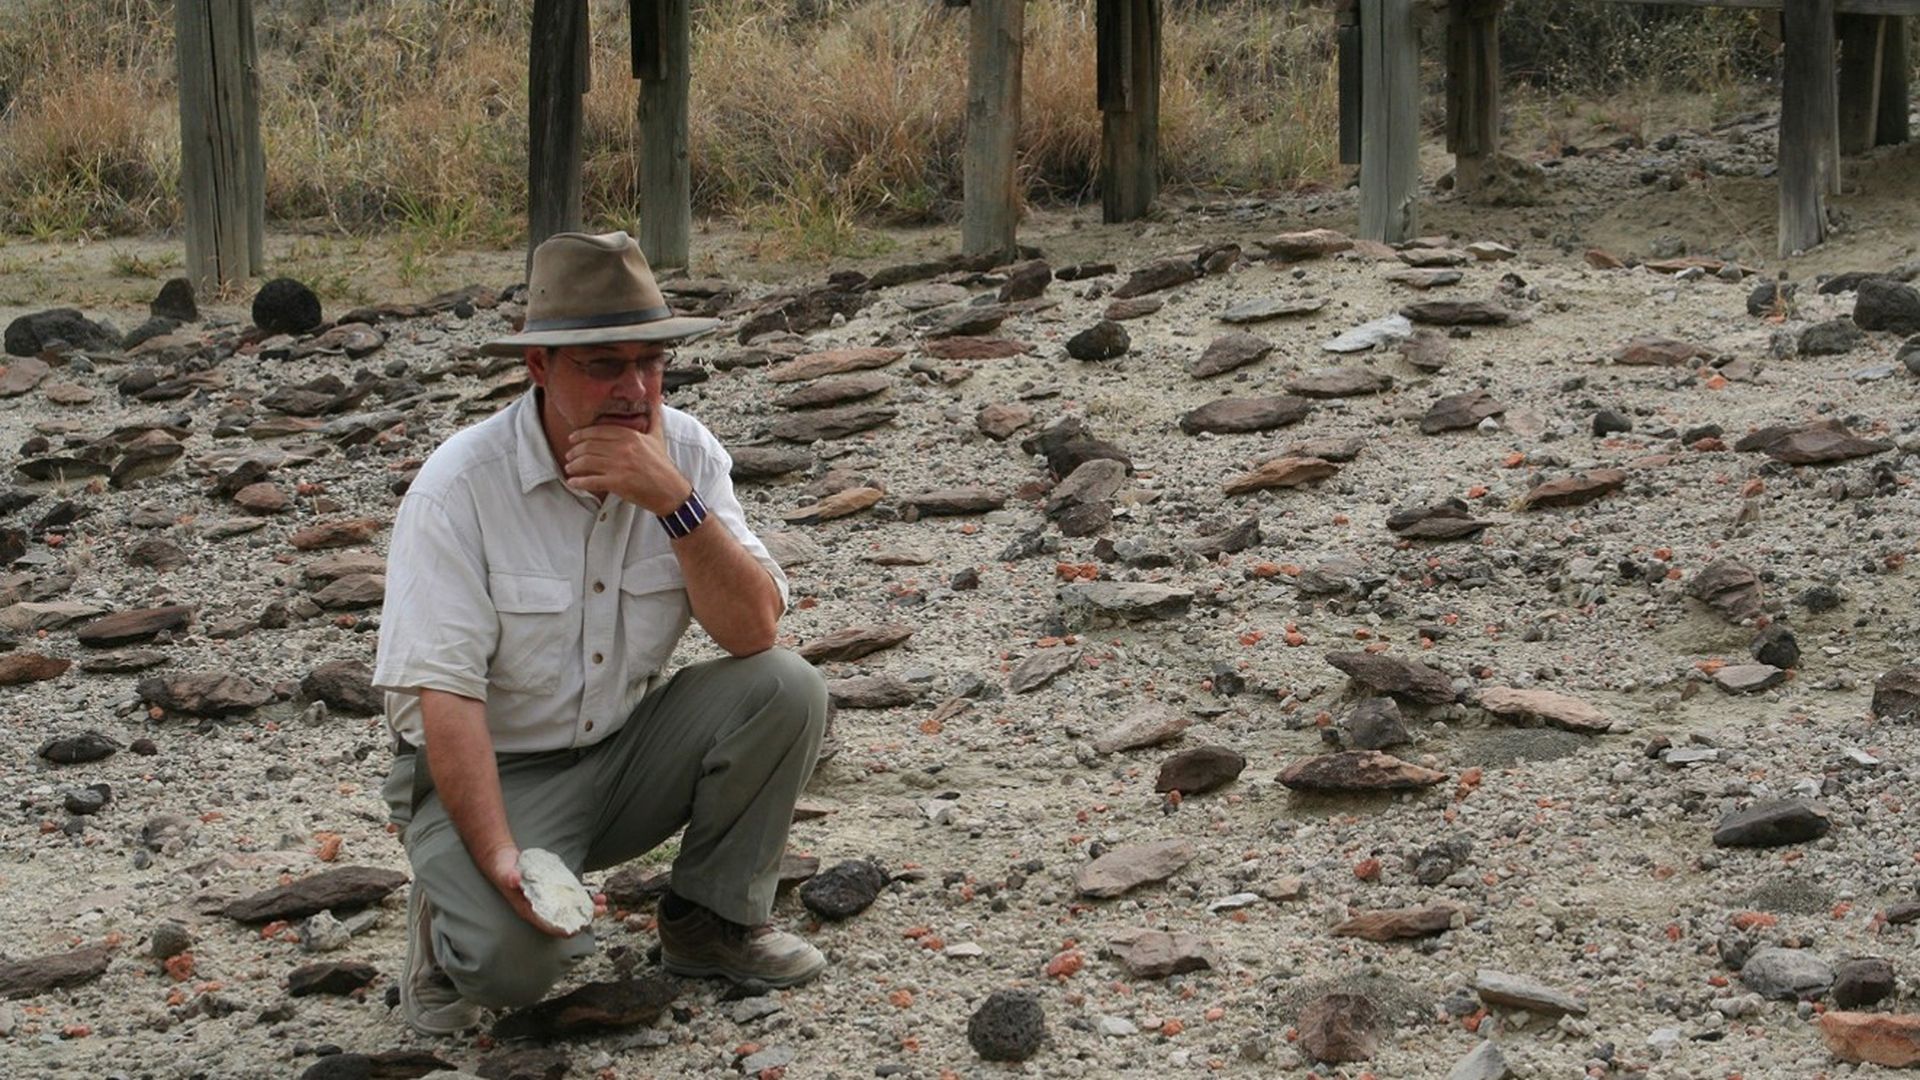 Archaeologist Rick Potts squats in the Olorgesailie Basin in Kenya with various surprisingly sophisticated tools found from 320,000 years ago.